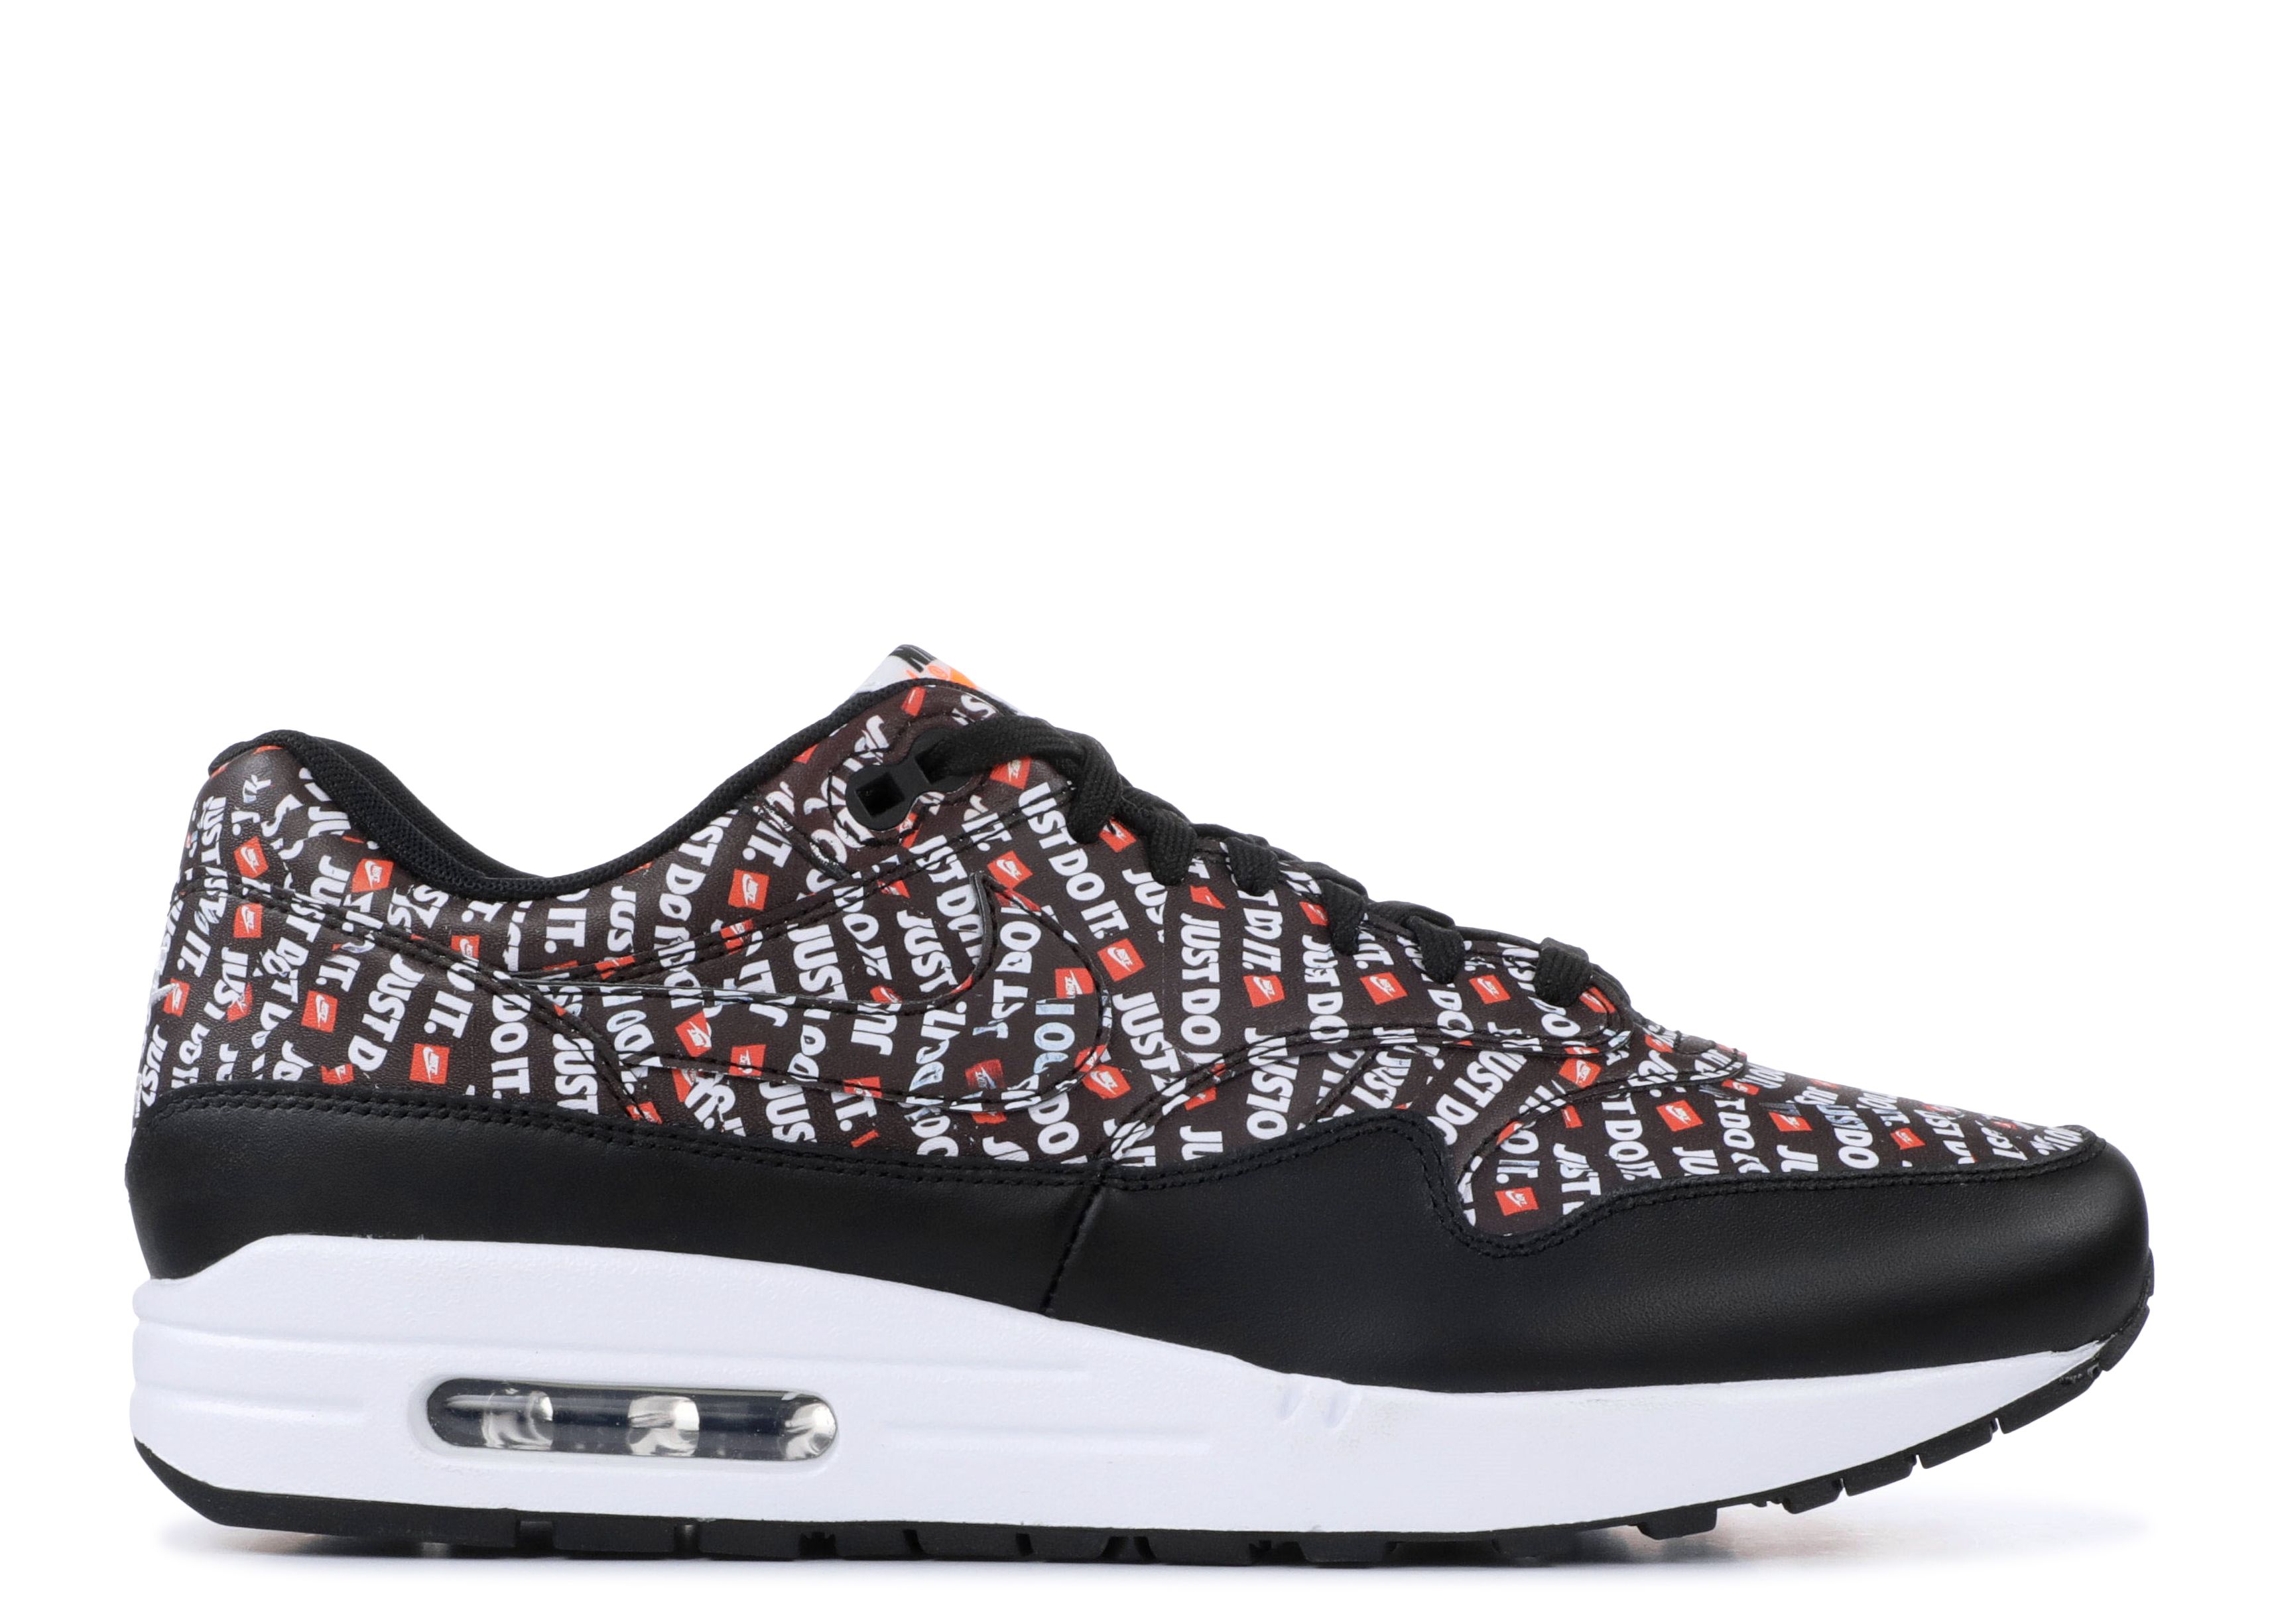 Air Max 1 'Just Do It' - Nike - 875844 